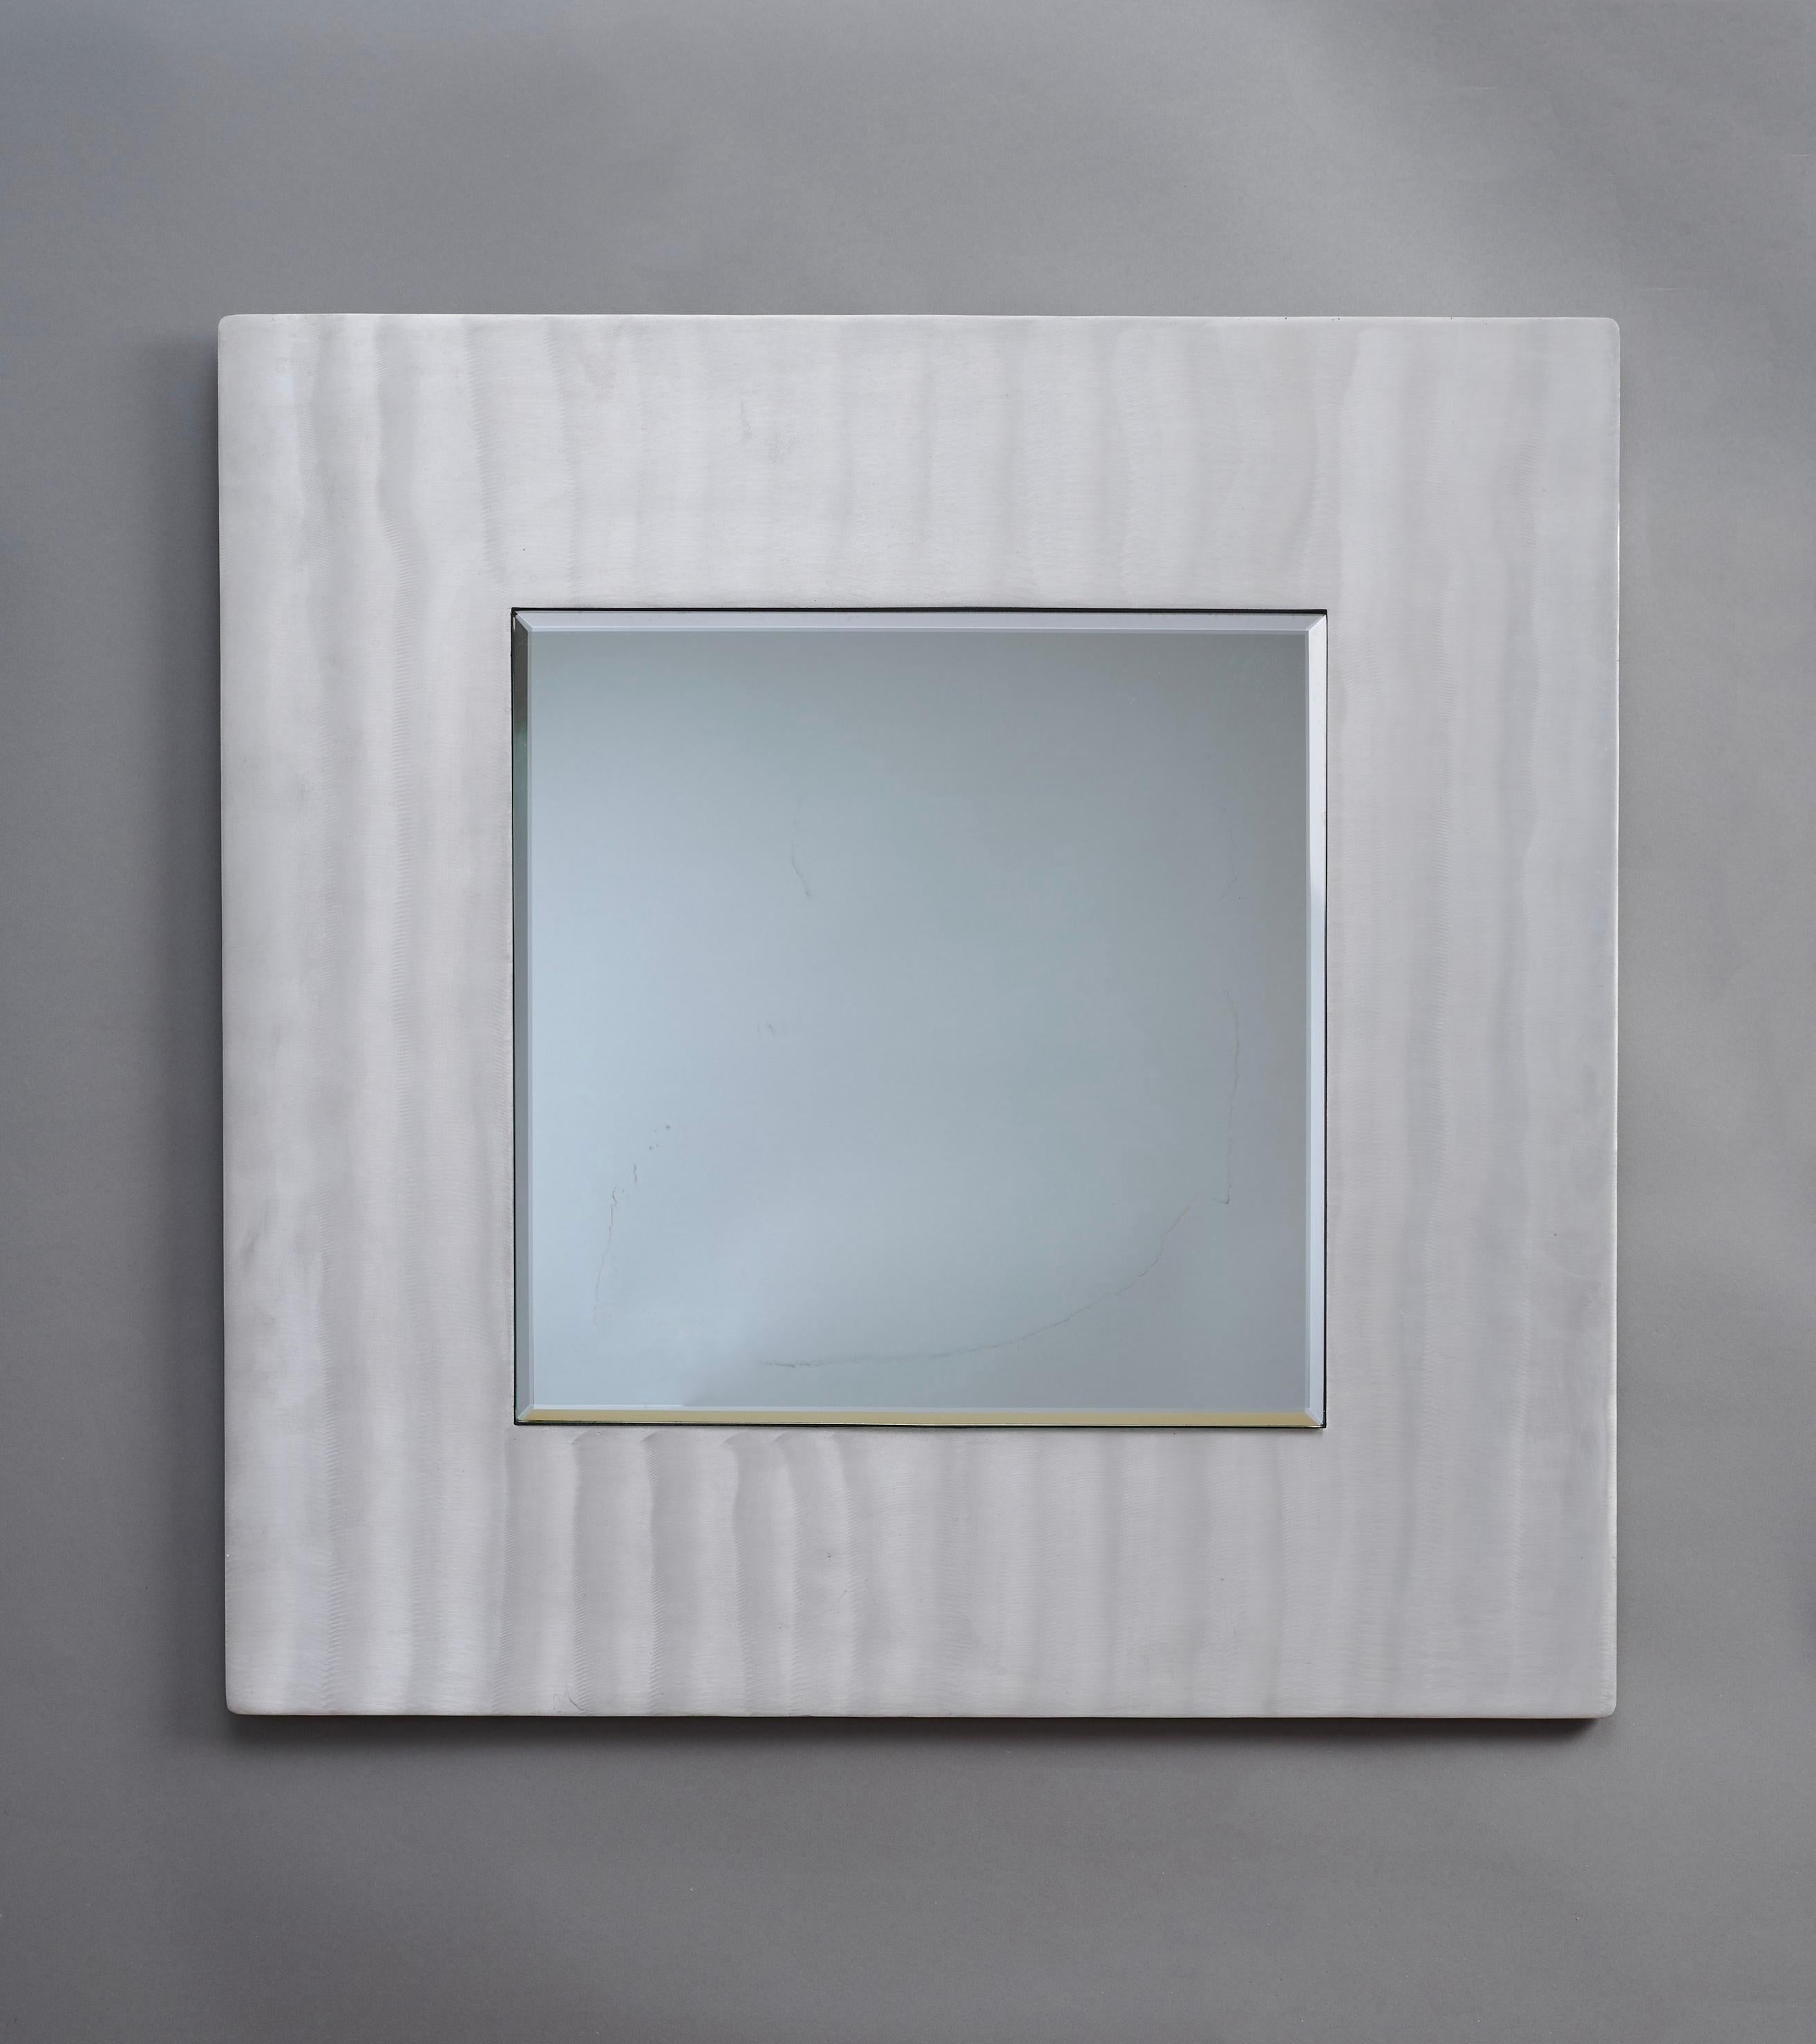 Lorenzo Burchiellaro (b. 1933)

A dynamic square wall mirror by Italian sculptor Lorenzo Burchiellaro, in hand-worked aluminum. The frame's textured surface is etched and brushed in gestural vertical waves, causing light to ripple and dance. 

A